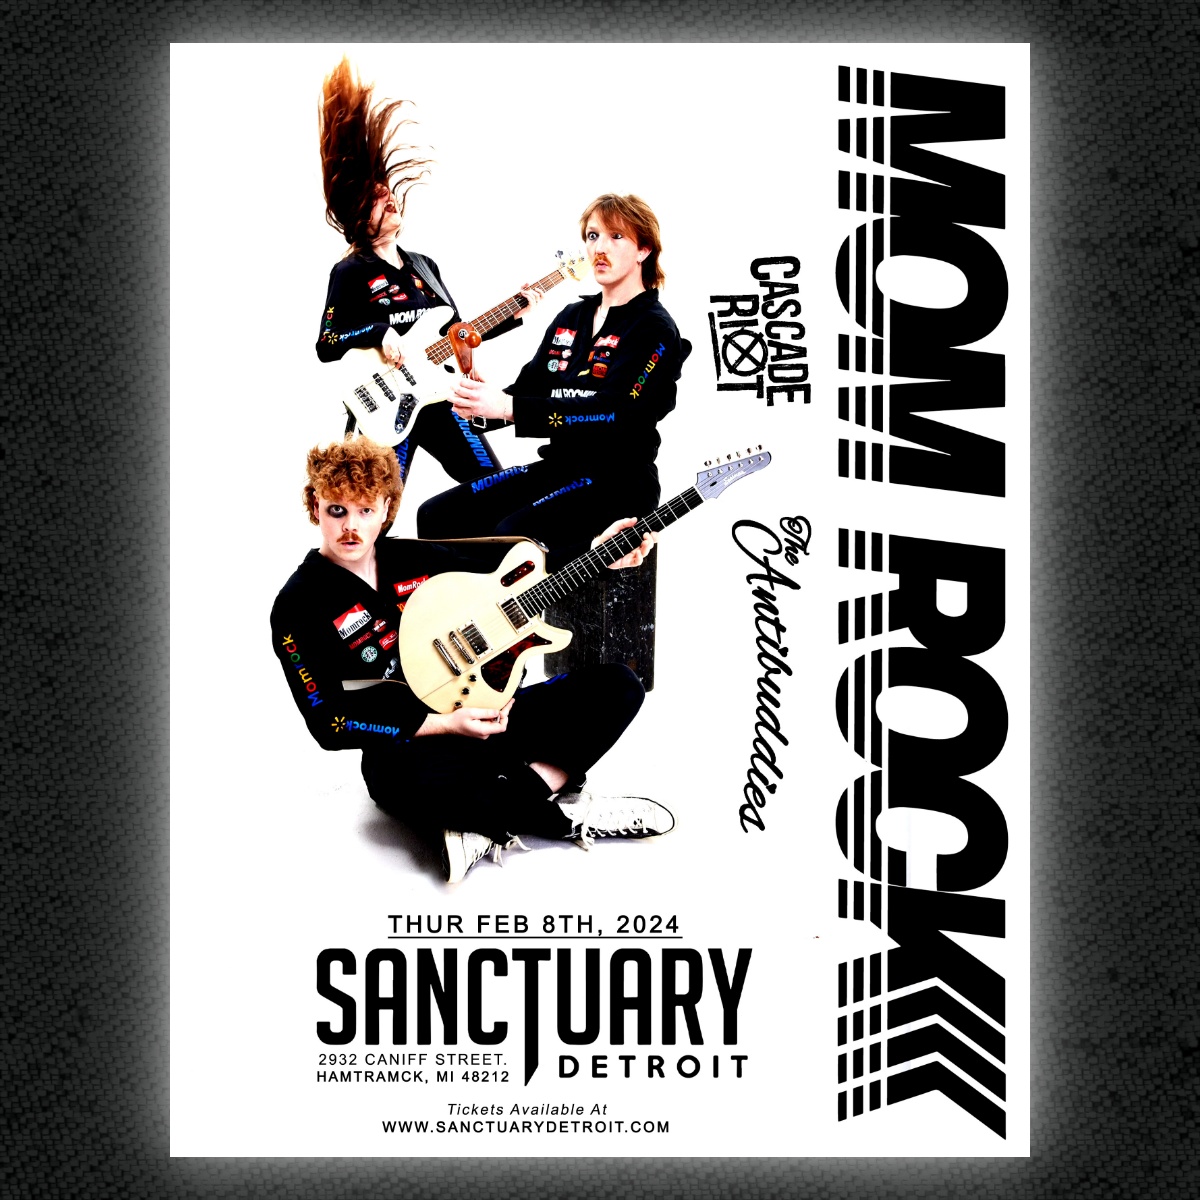 Mom Rock hits The Sanctuary 2/8 with special guests Cascade Riot and The Antibuddies !! Grab your tickets at sanctuarydetroit.com